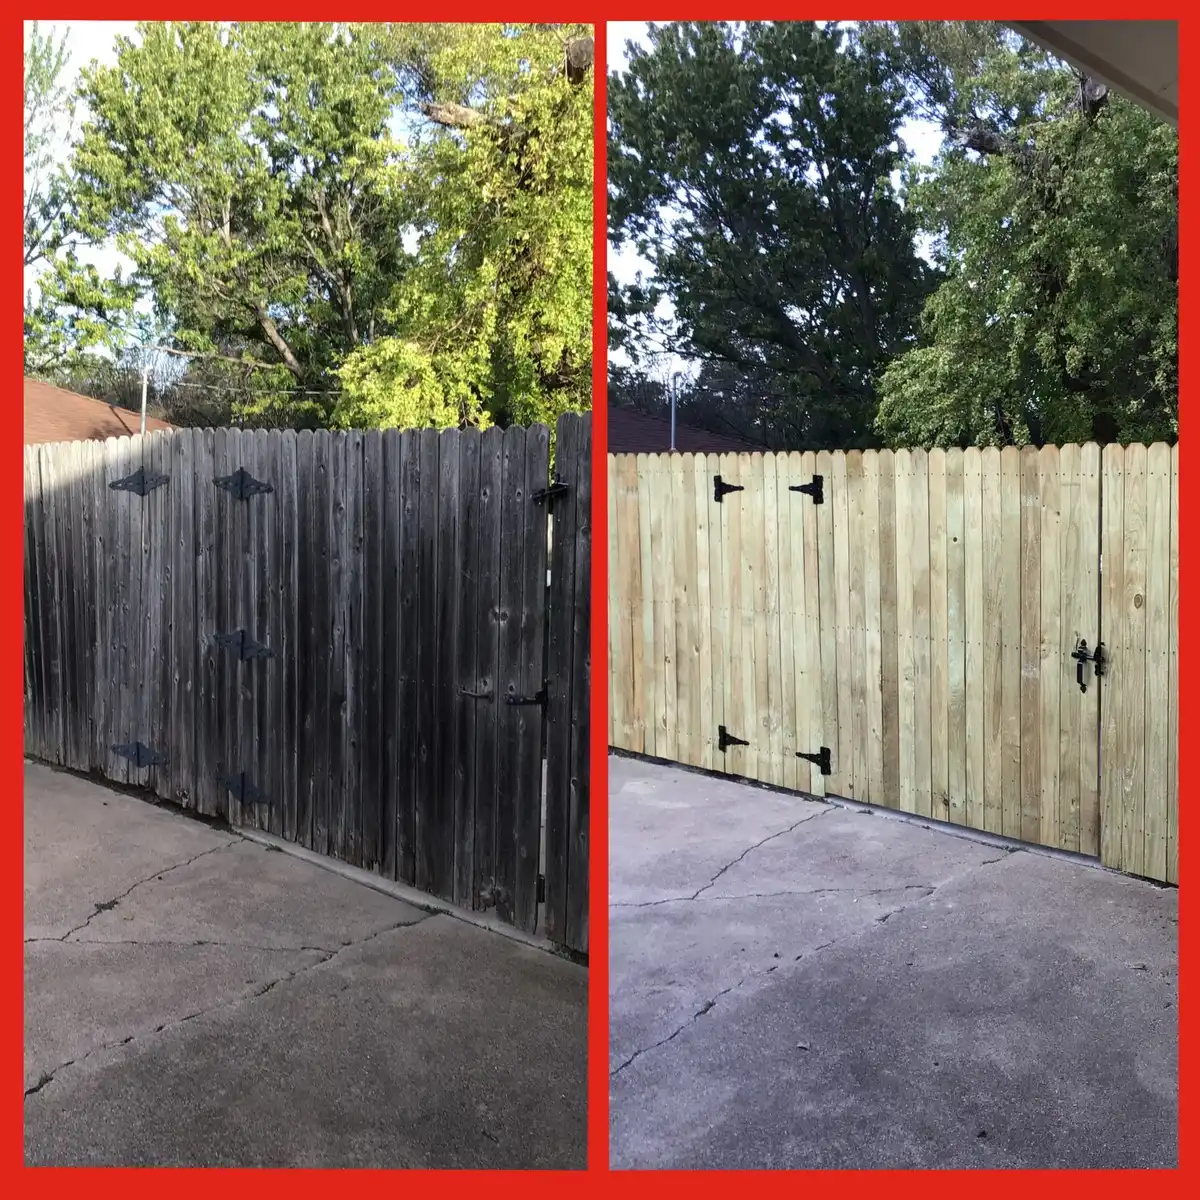 Before and after photos showcasing fence repair performed by Mr. Handyman